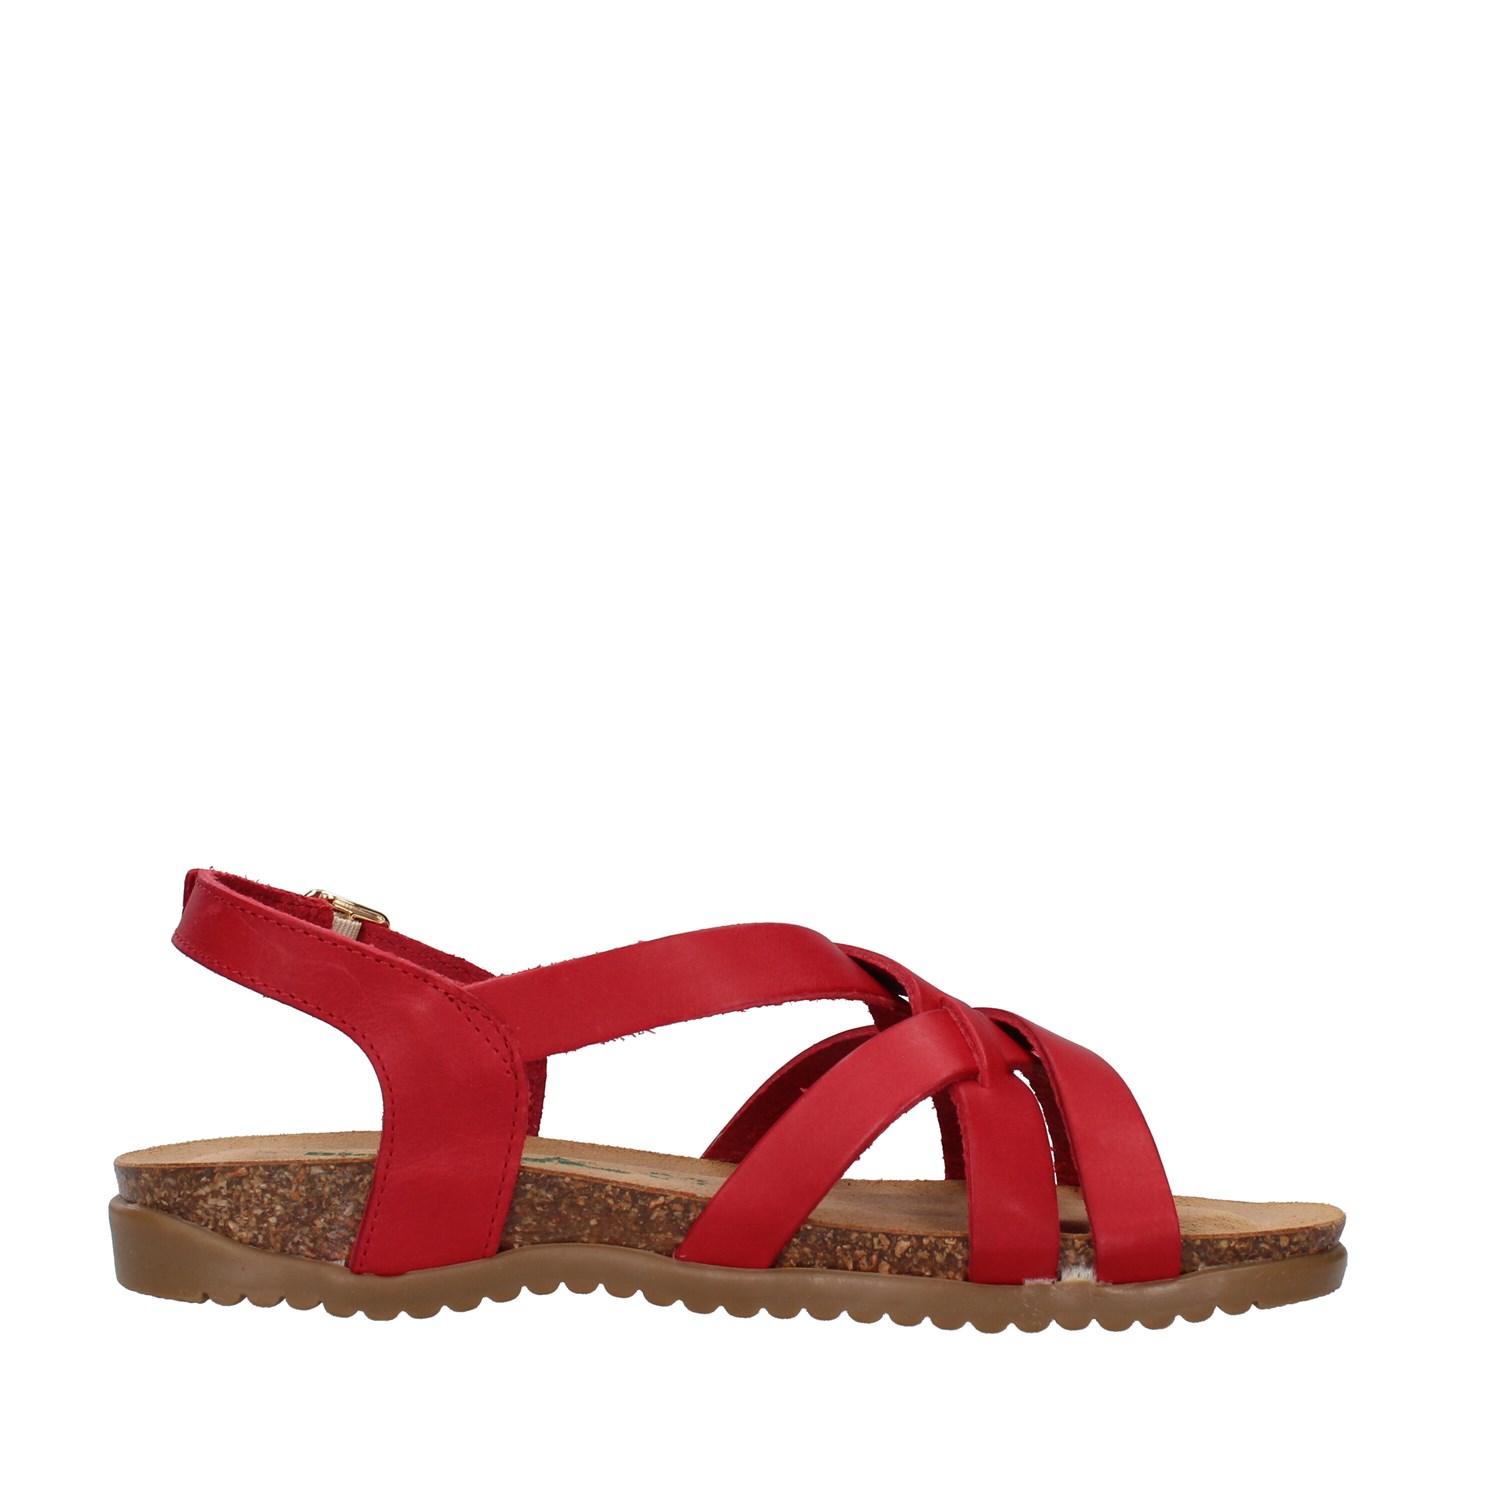 Bionatura Shoes Woman Sandals RED 34A2168